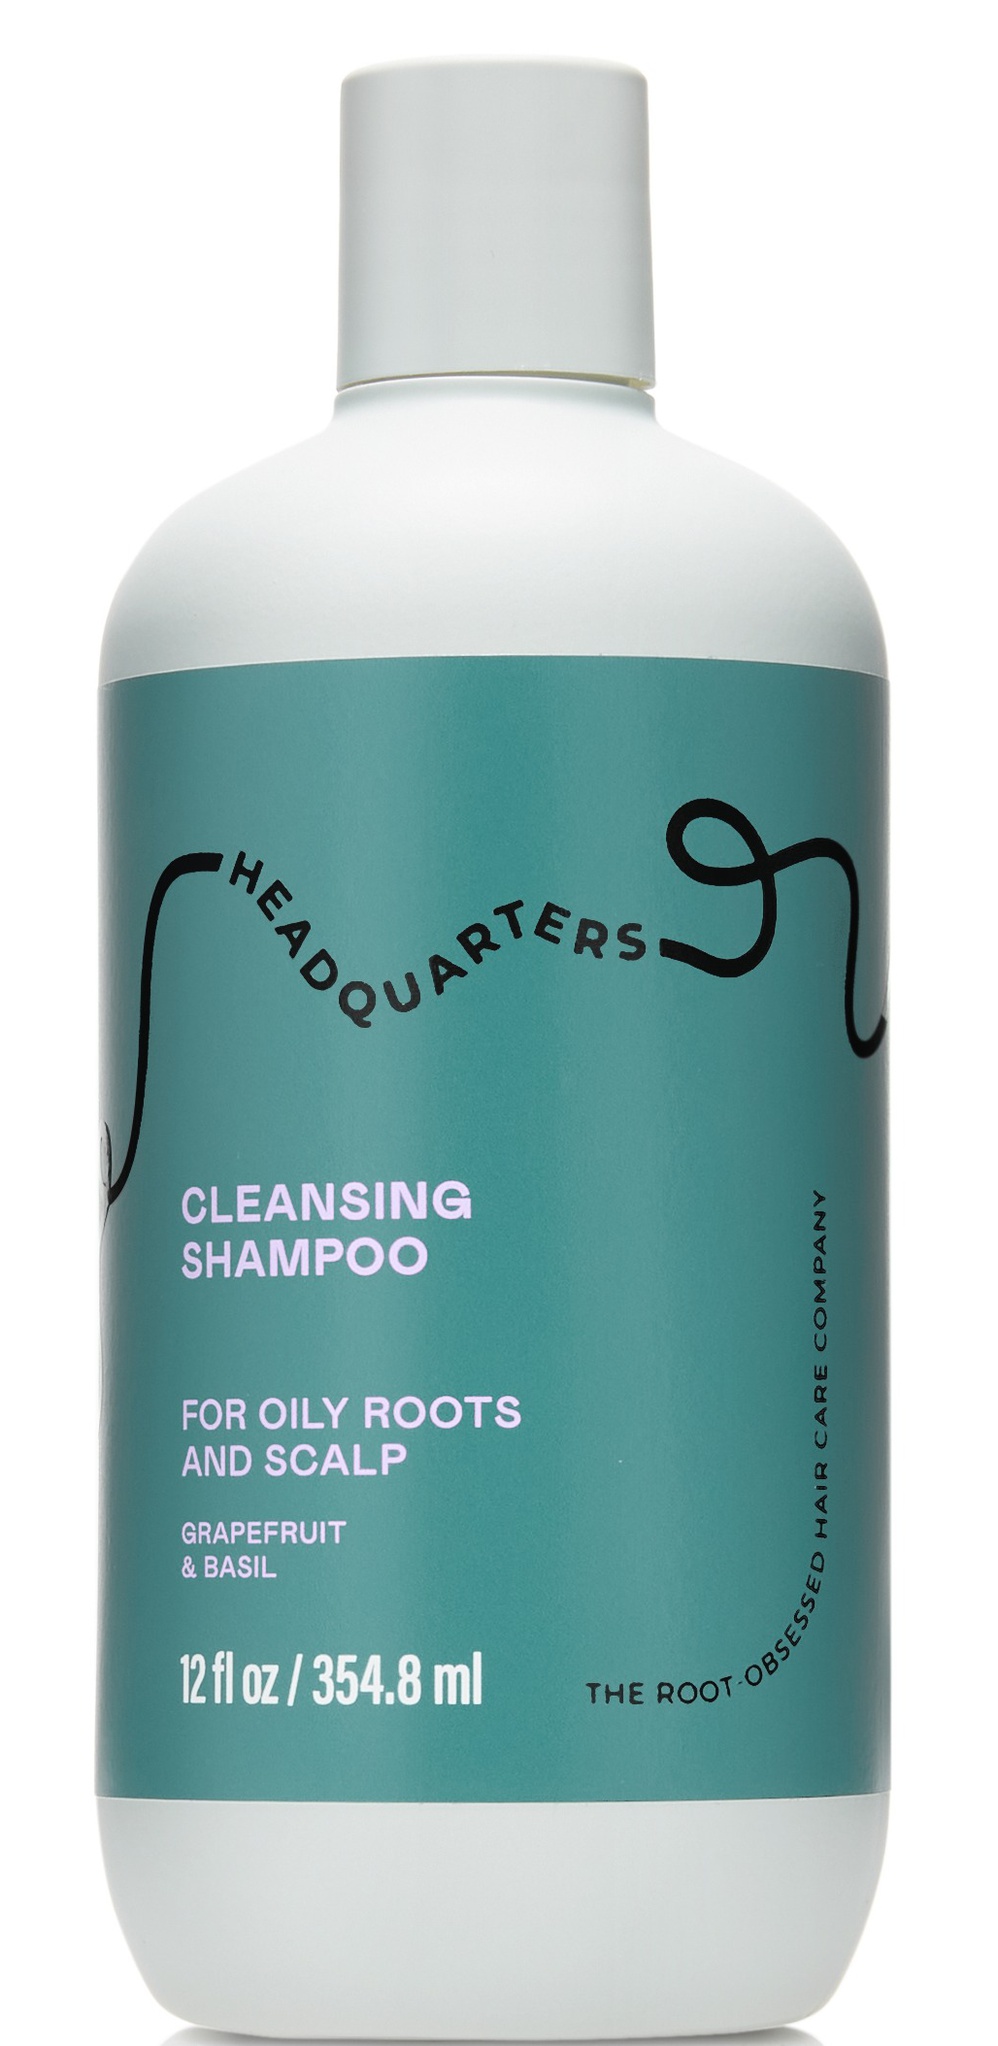 Headquarters Cleansing Shampoo For Oily Roots And Scalp